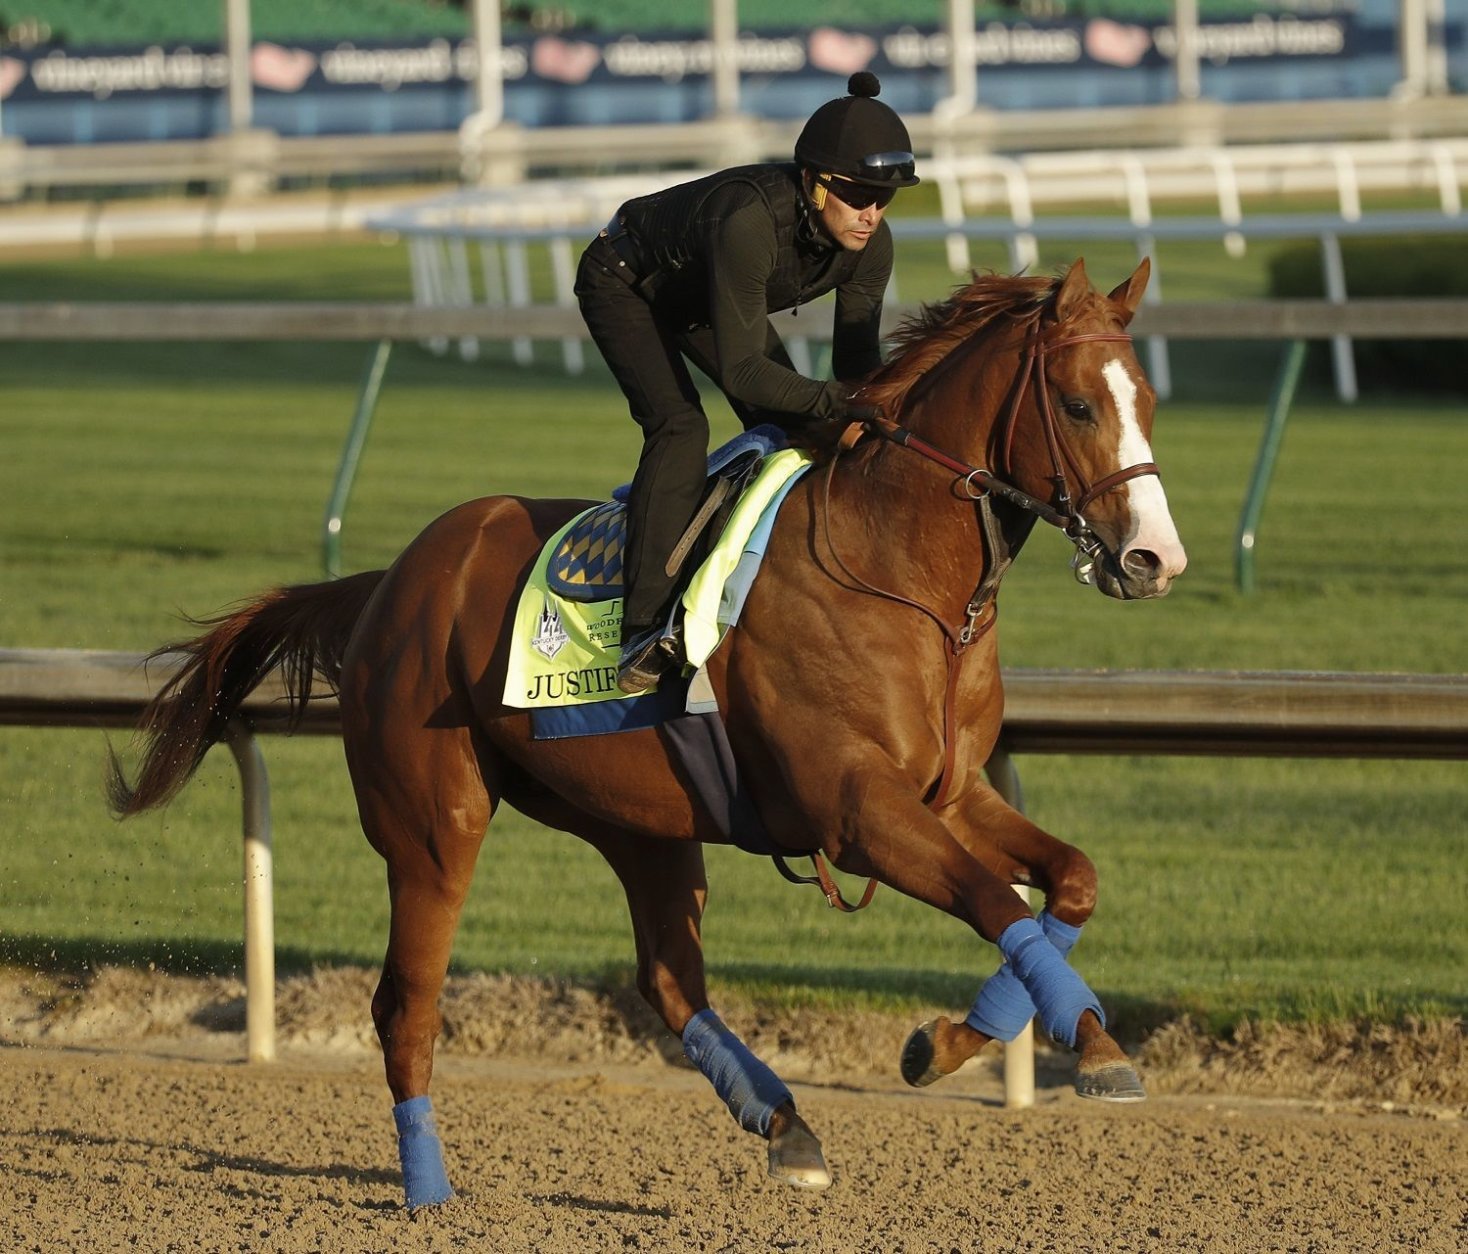 Kentucky Derby hopeful Justify runs during a morning workout at Churchill Downs Tuesday, May 1, 2018, in Louisville, Ky. The 144th running of the Kentucky Derby is scheduled for Saturday, May 5. (AP Photo/Charlie Riedel)